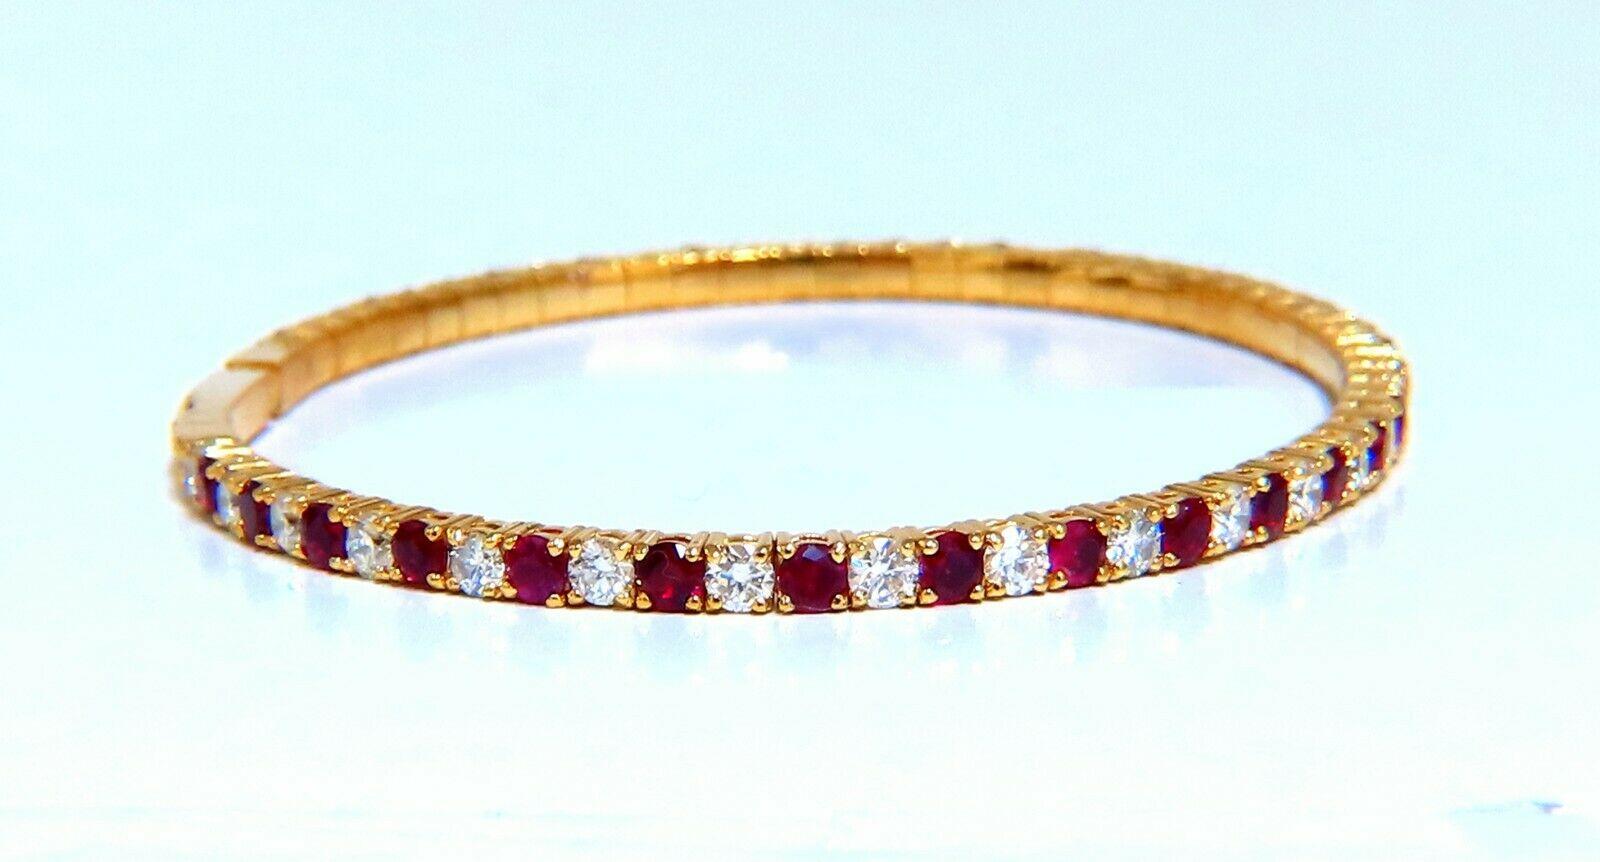 Ruby & Classic Alternating Tennis Flexible Bangle

2.50ct. Natural ruby bracelet.

Rounds, full cuts 

Clean clarity

Transparent & Vivid Reds.

Average 2.6mm each

2.15ct Natural Diamonds

Rounds & full cuts

Vs-s clarity G-color

14kt. yellow gold